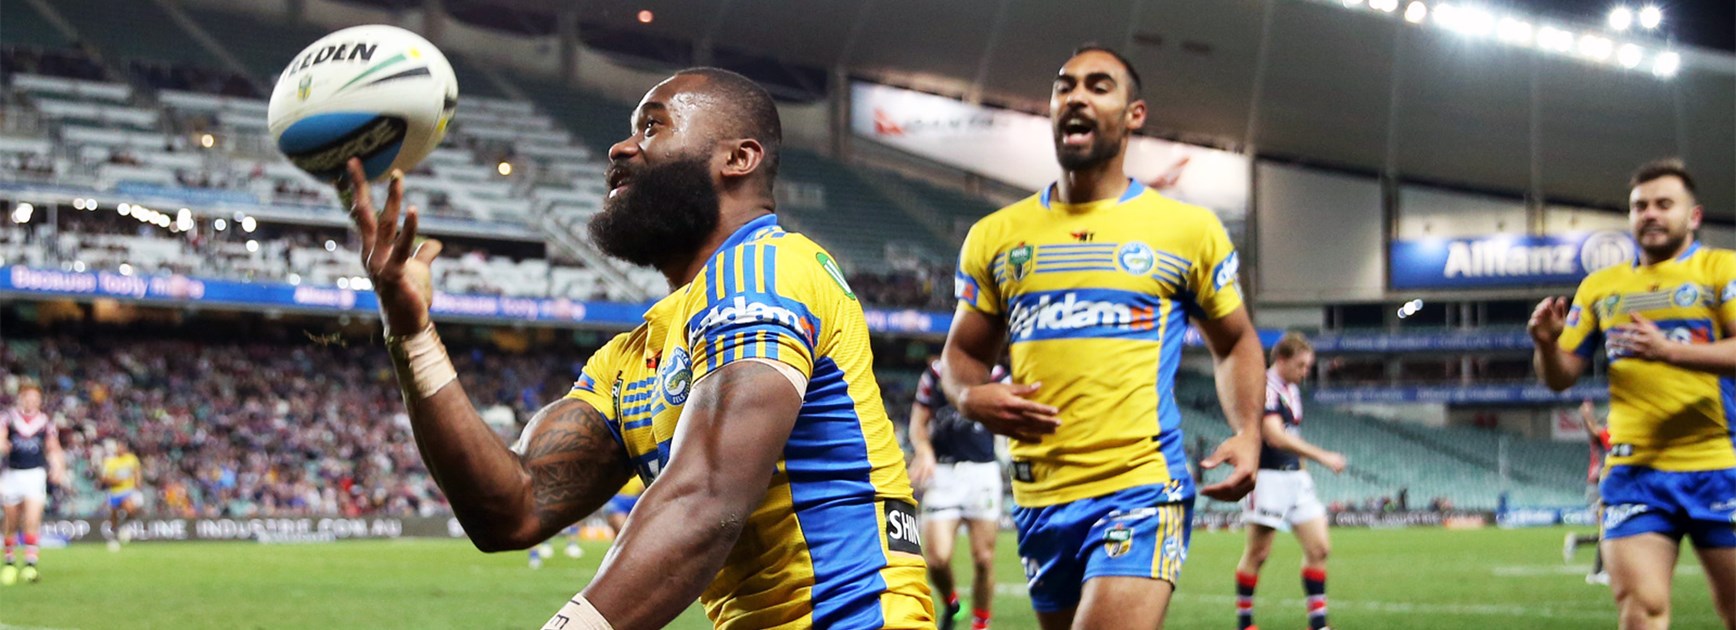 Semi Radradra celebrates his first-half try against the Sydney Roosters on Saturday night.